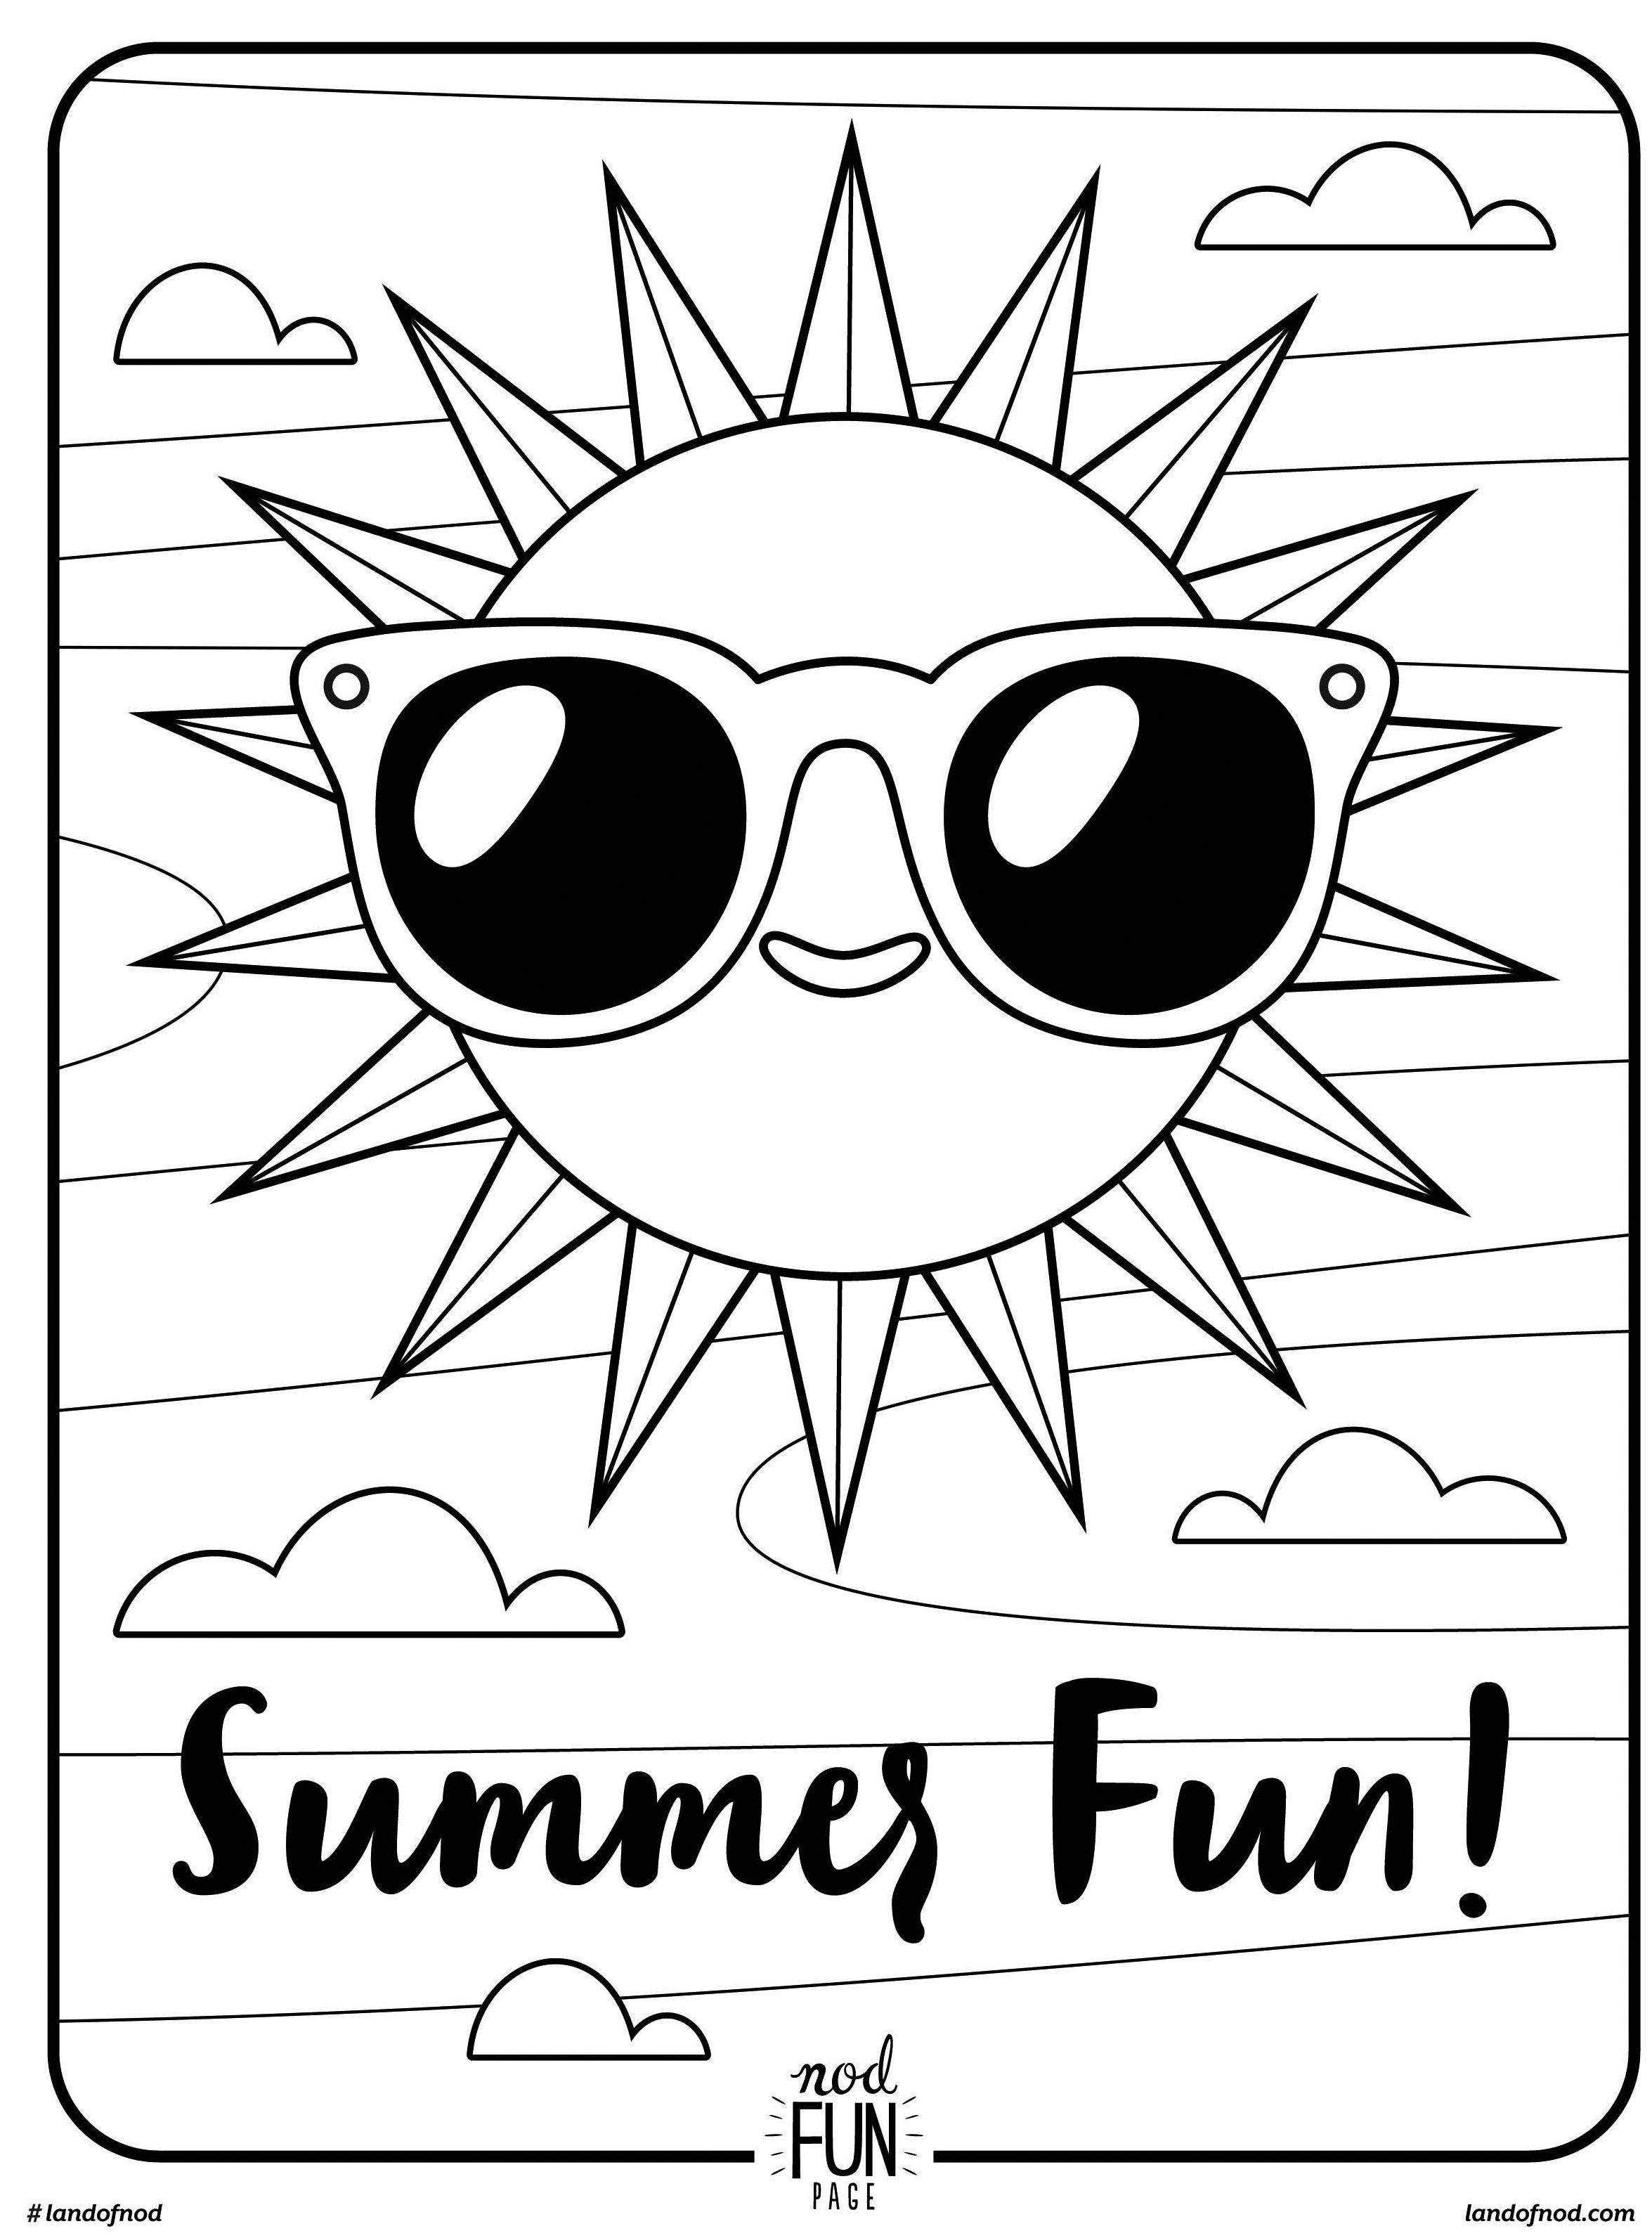 Free Printable Coloring Page: Summer Fun | Summer//underwater - Free Printable Summer Coloring Pages For Adults